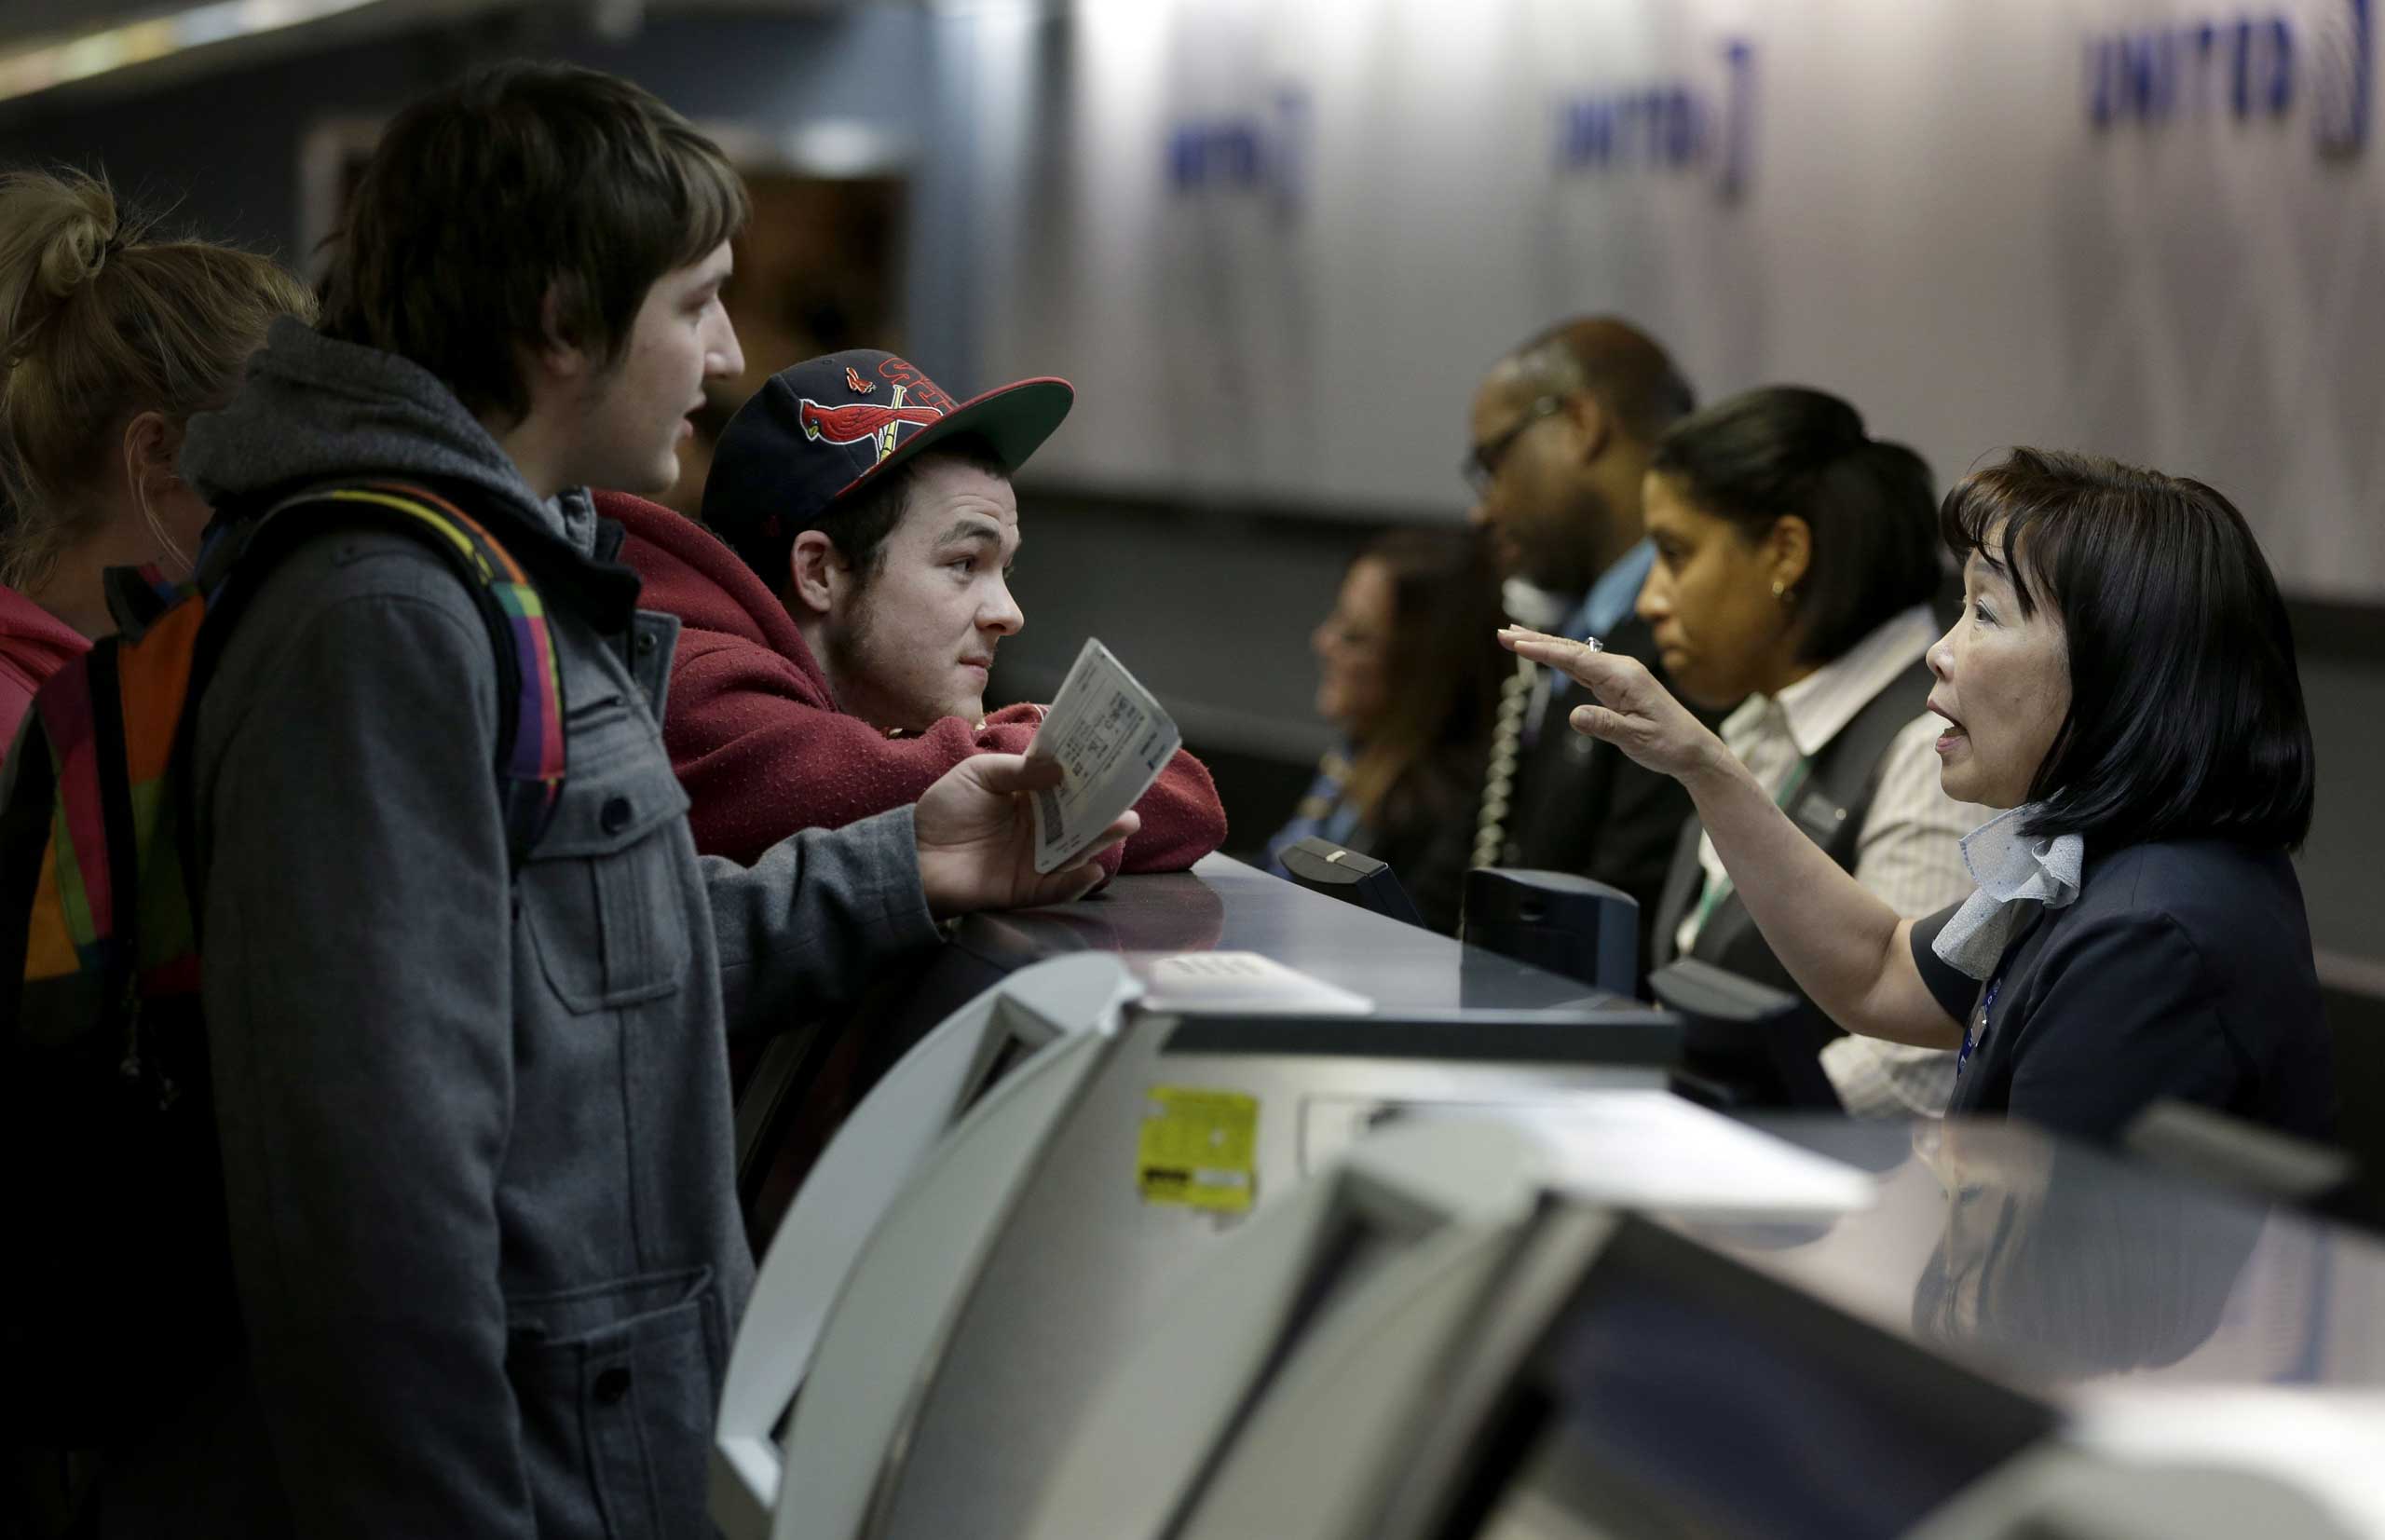 Brandon Bybee, left, and Cory McKenrick, second from left, talk with a ticket agent to try and move up their flight to Illinois in order to beat an expected snow storm at LaGuardia Airport in New York City on Jan. 26, 2015. (Seth Wenig—AP)